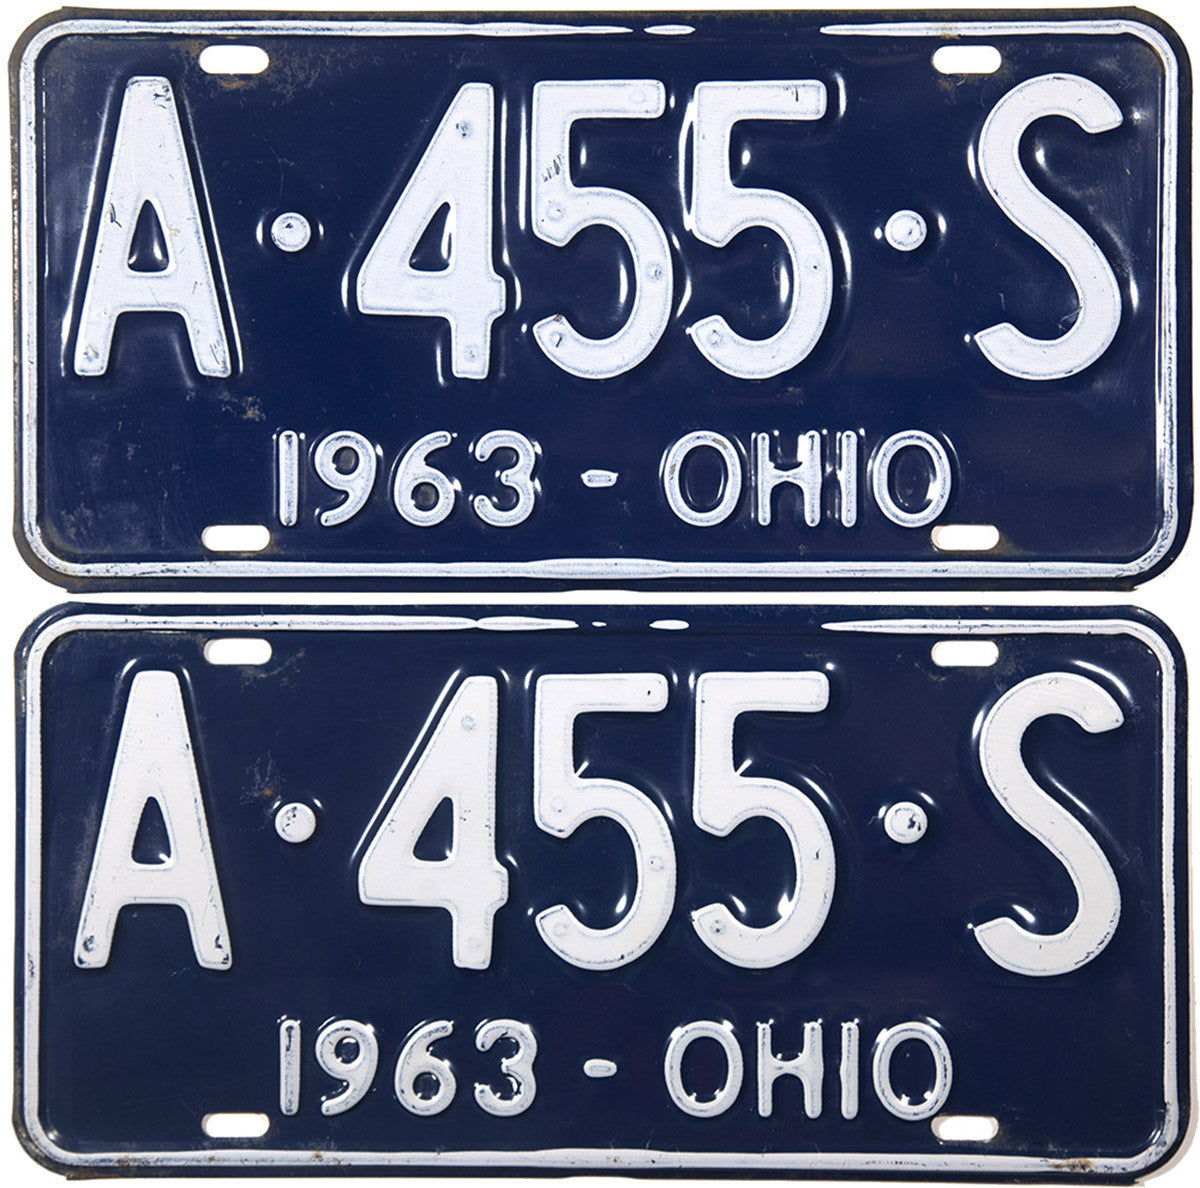 1963 Ohio License Plates for sale by Brandywine General Store in excellent minus condition